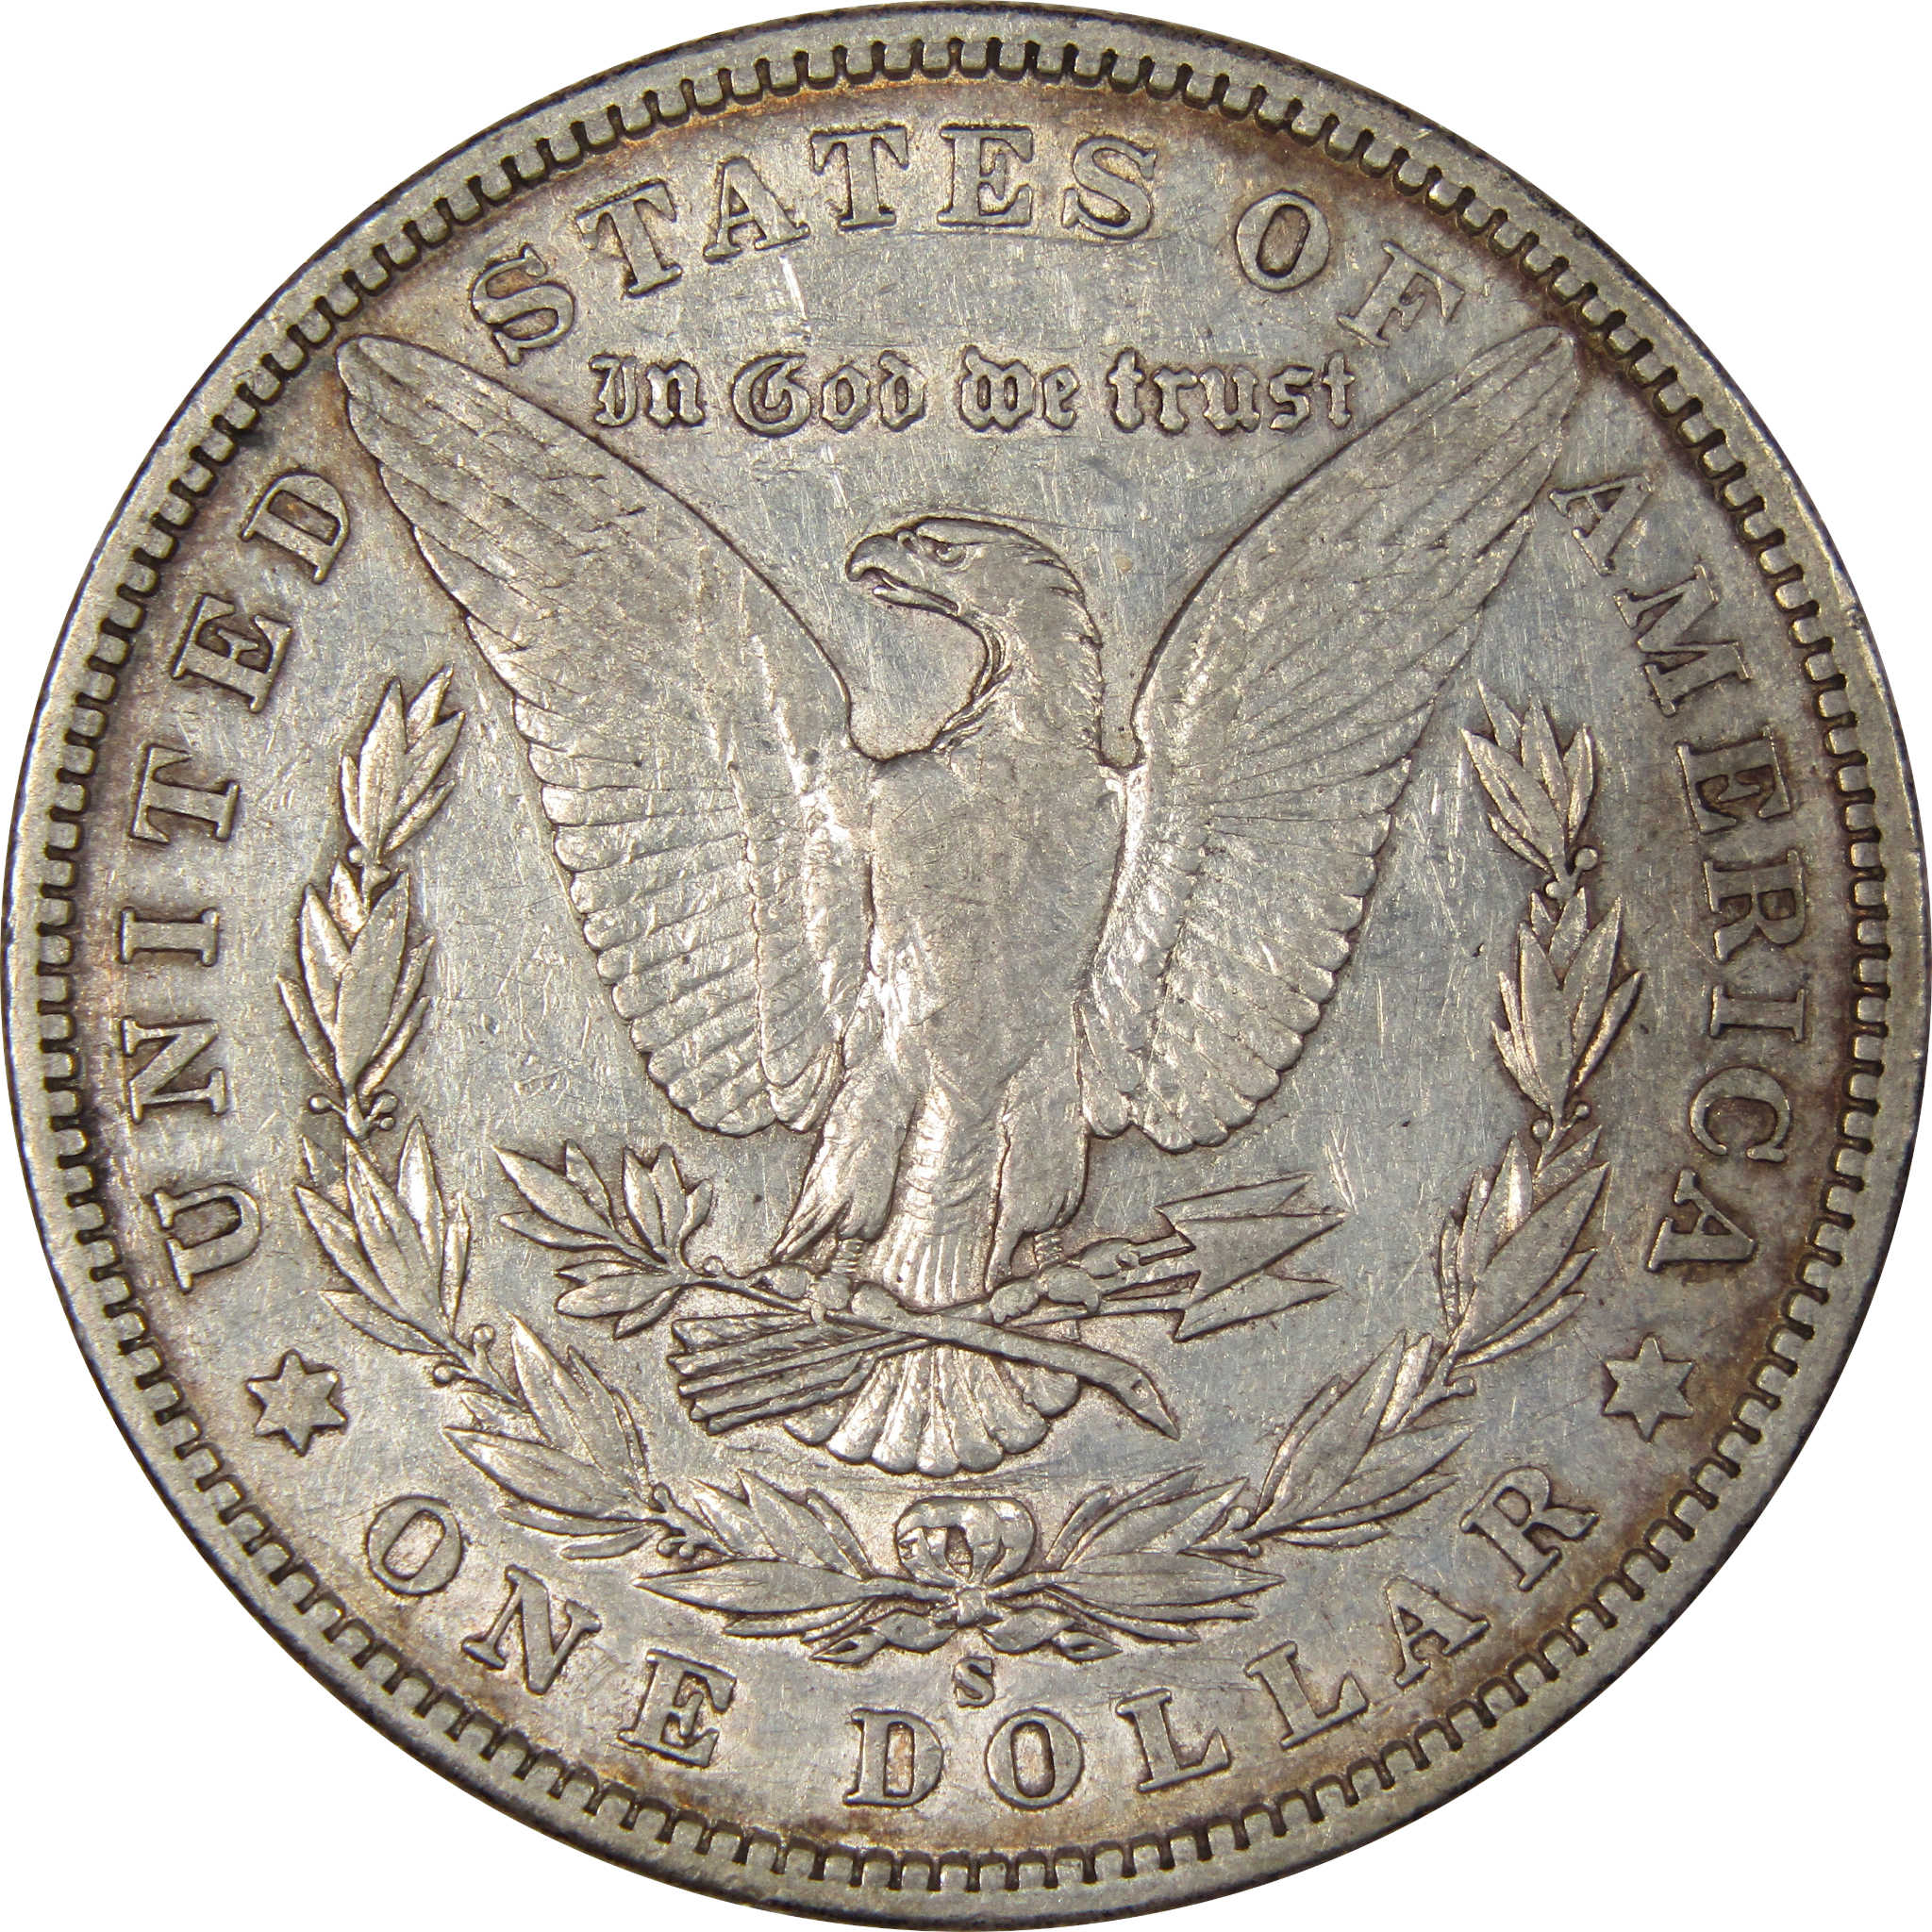 1903 S Morgan Dollar XF EF Extremely Fine 90% Silver SKU:IPC6971 - Morgan coin - Morgan silver dollar - Morgan silver dollar for sale - Profile Coins &amp; Collectibles